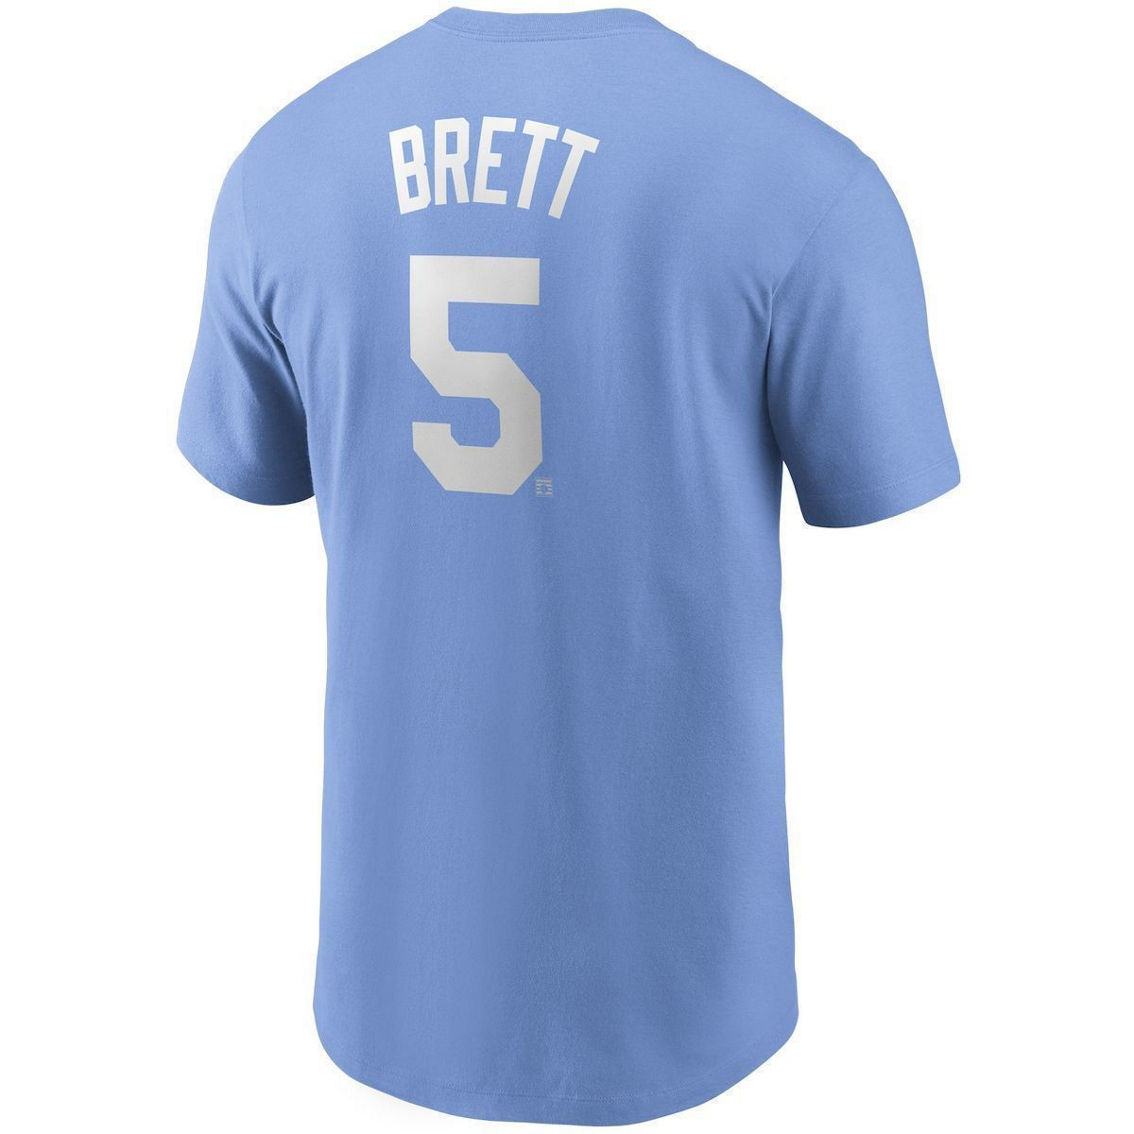 Nike Men's George Brett Light Blue Kansas City Royals Cooperstown Collection Name & Number T-Shirt - Image 4 of 4